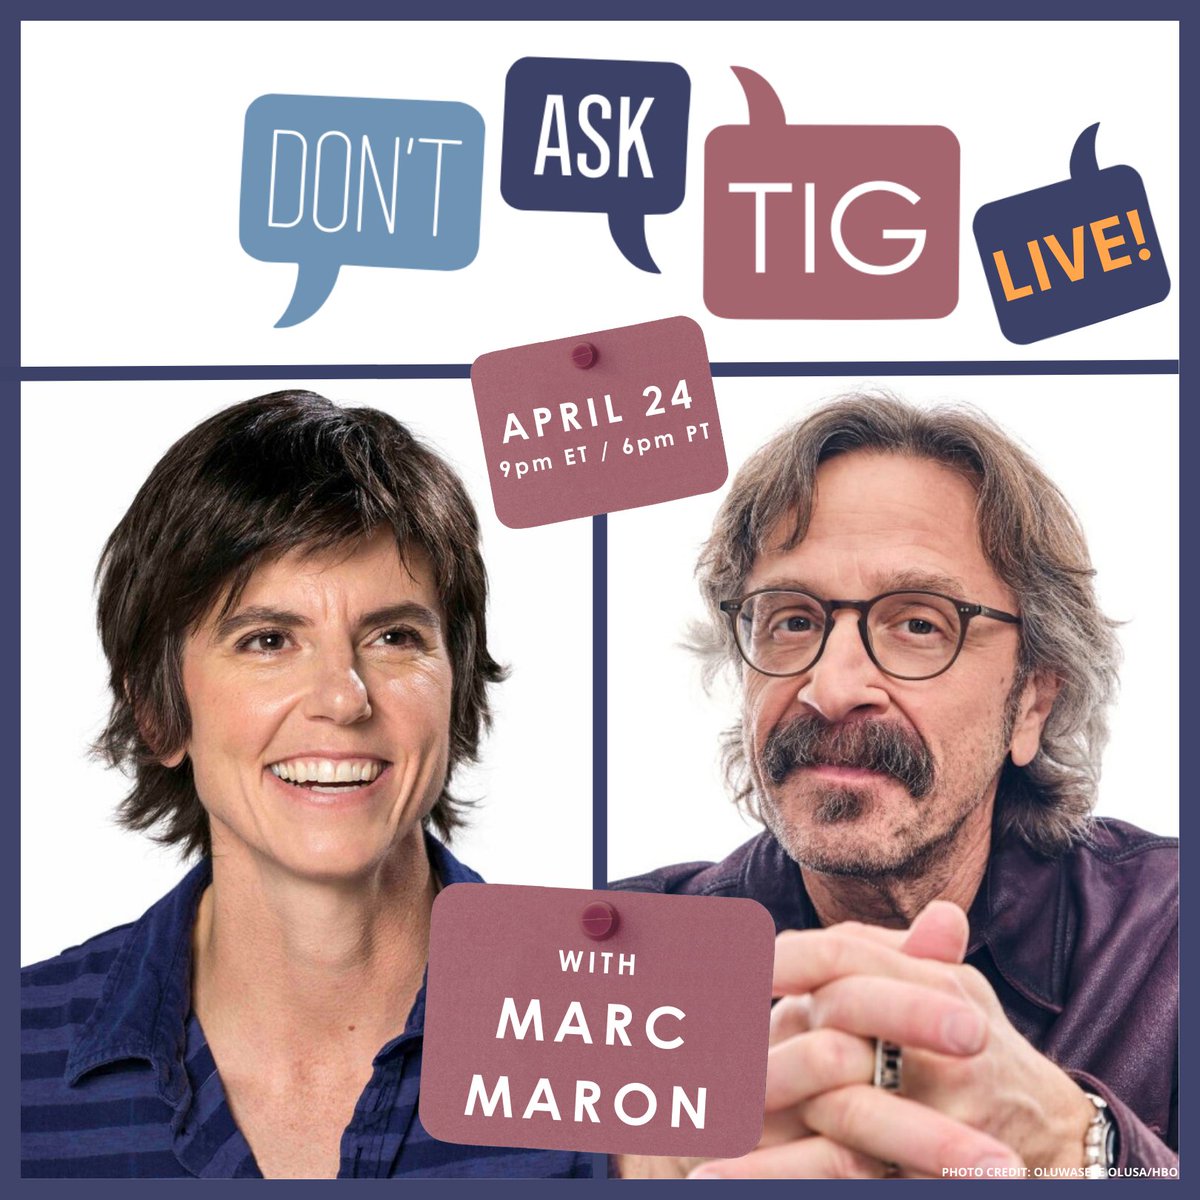 Want to ask @marcmaron & @TigNotaro for advice? Here’s your chance! Join us on 4/24 for an evening of hilariously unqualified guidance from two of your favorite stand-up comedians. Reserve your spot at this special virtual event by donating $15 or more: support.americanpublicmedia.org/dontasktig-eve…